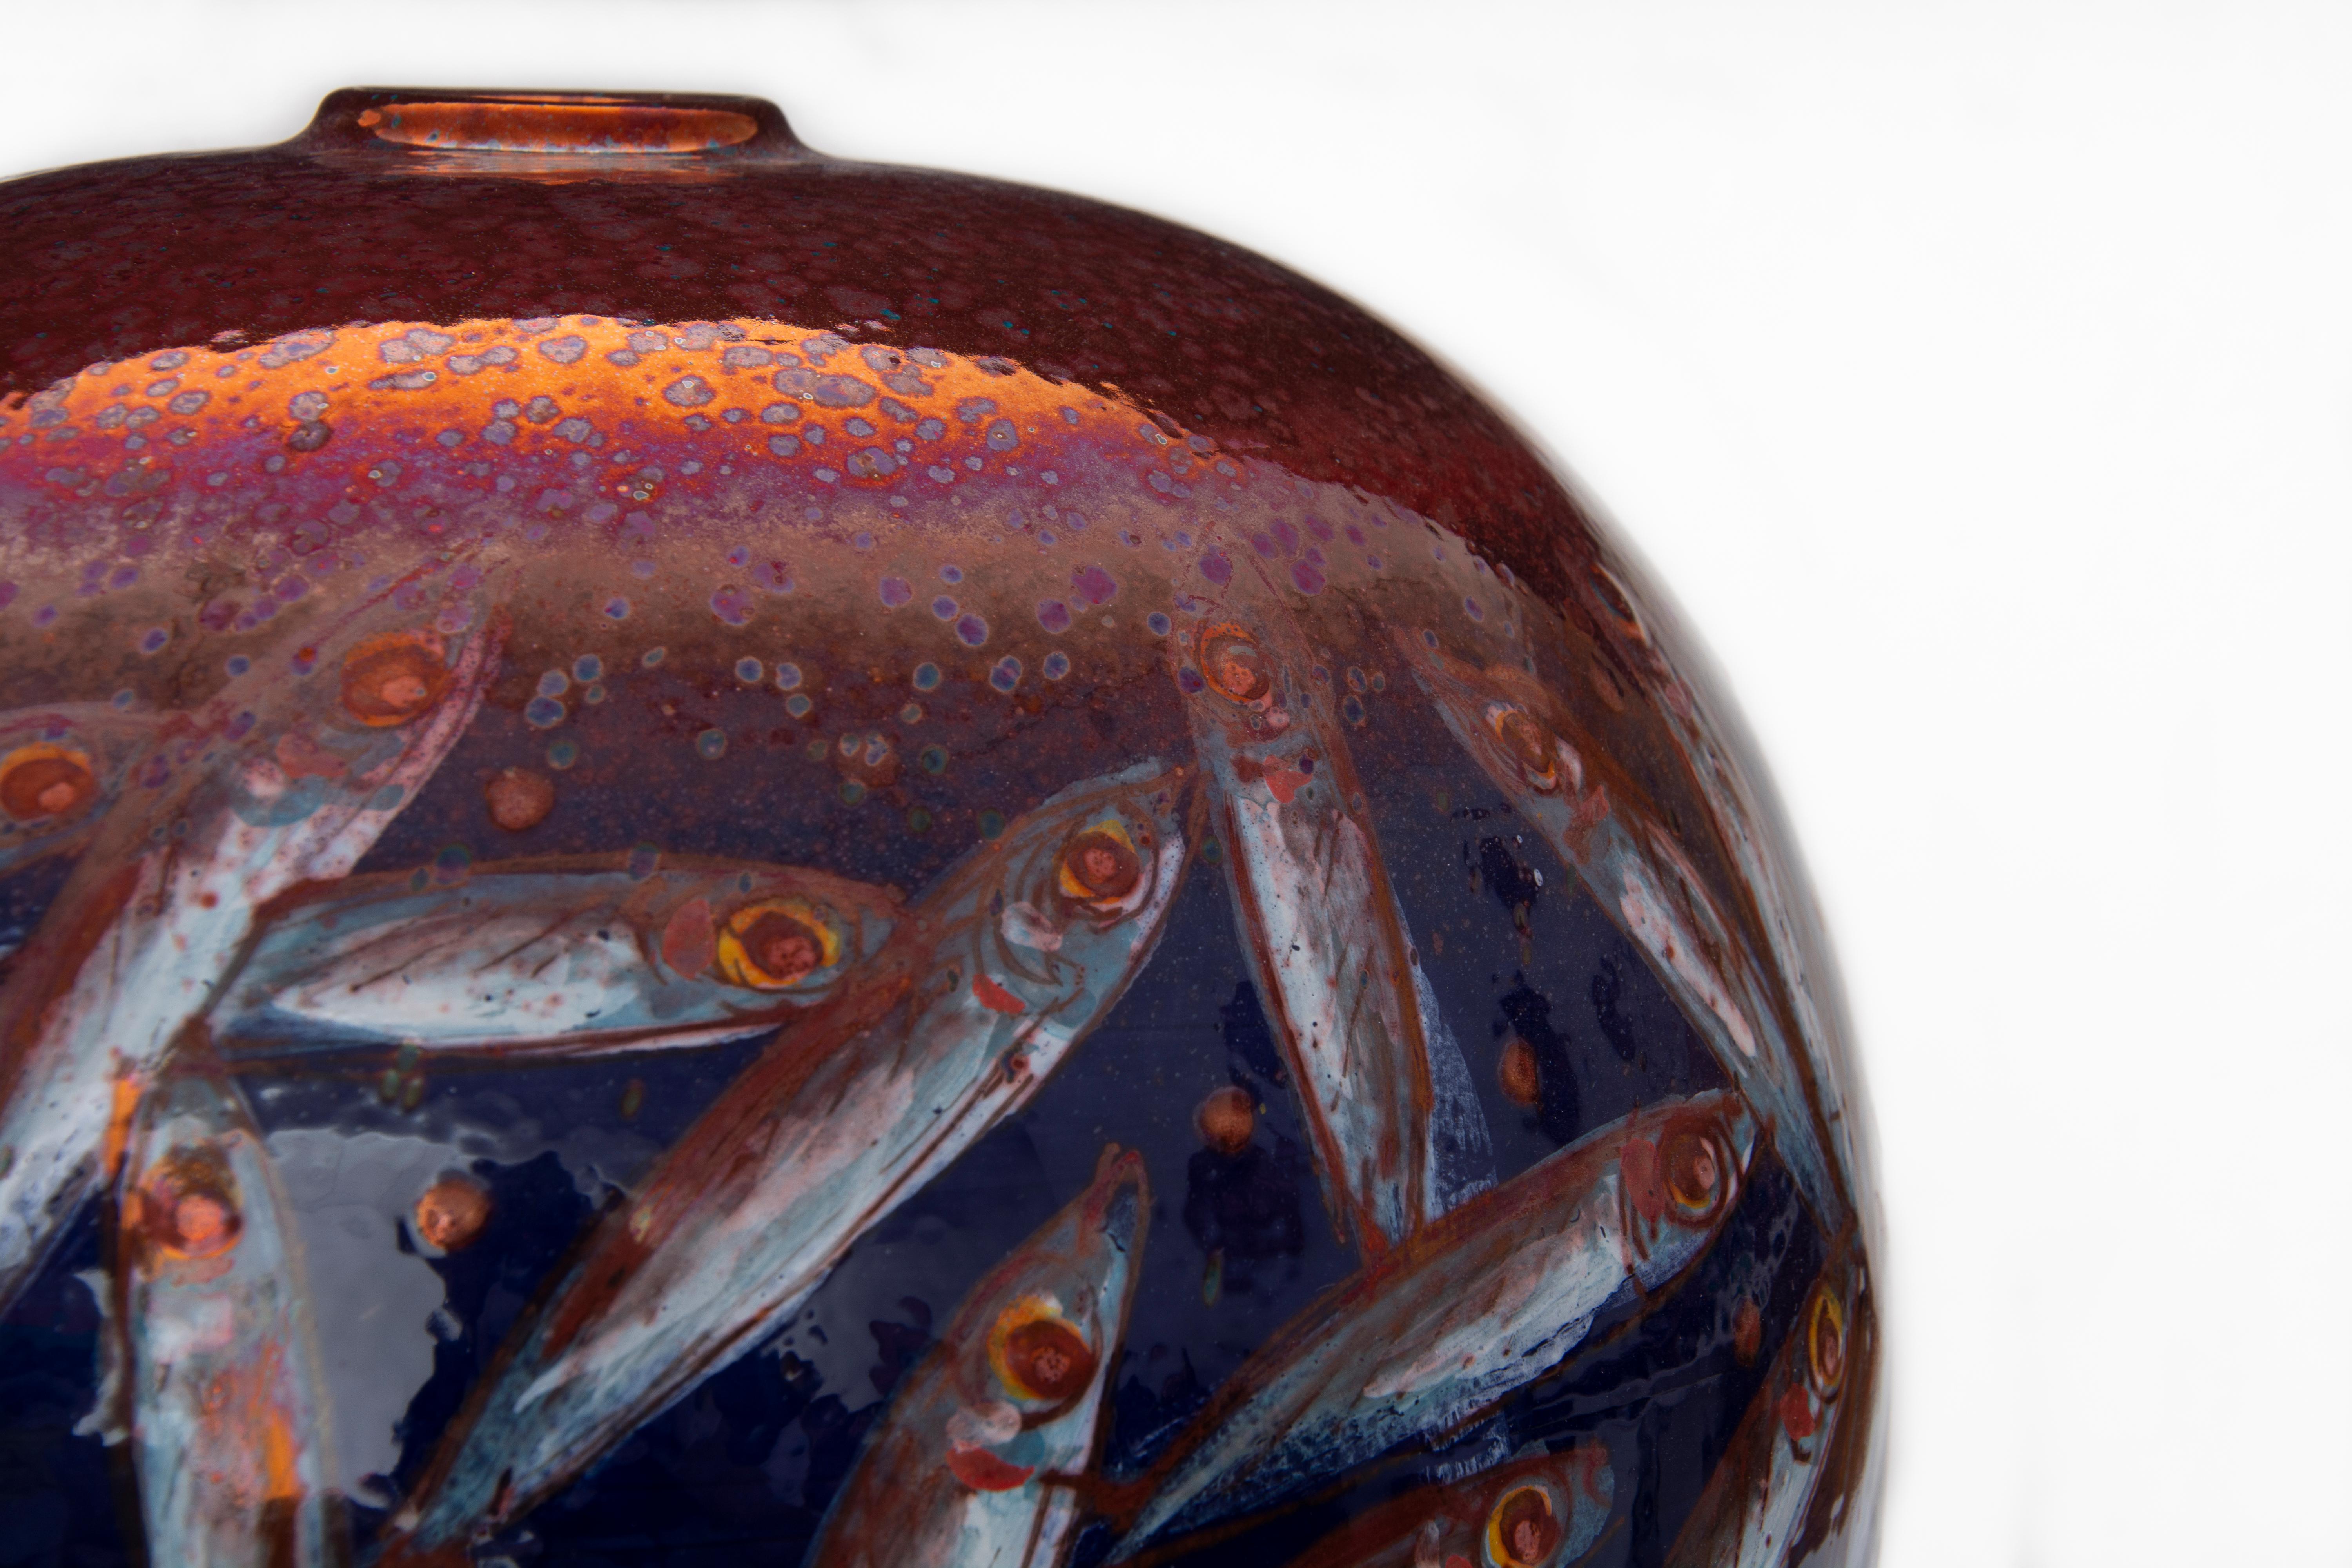 Ceramic Moon Jar by Bottega Vignoli Hand Painted Glazed Faience Contemporary In New Condition For Sale In London, GB